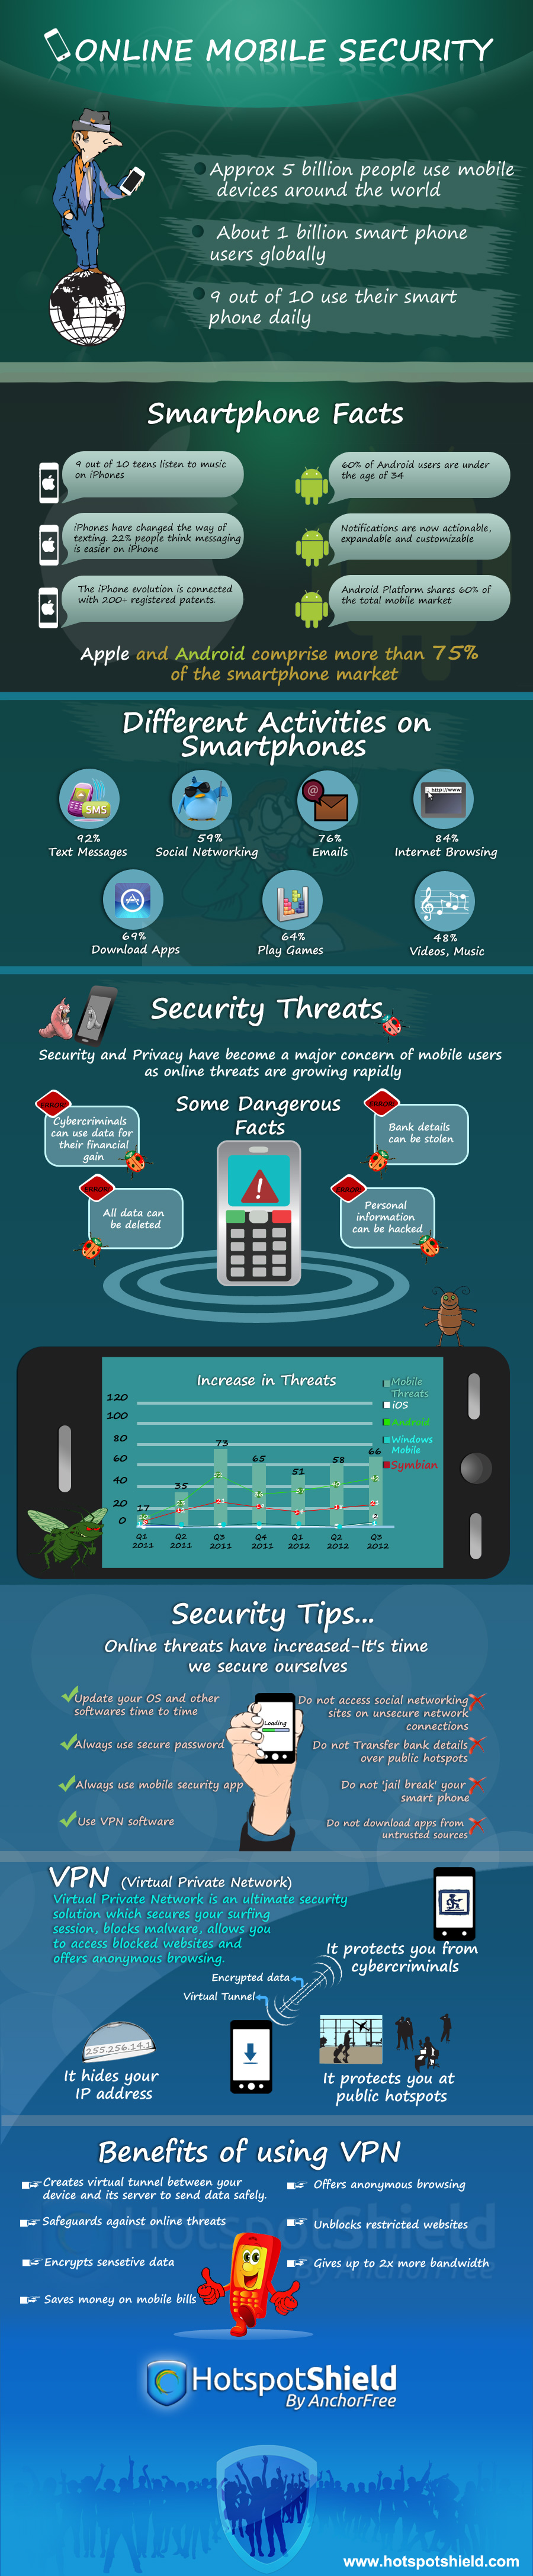 Benefits and risks with smartphone usage